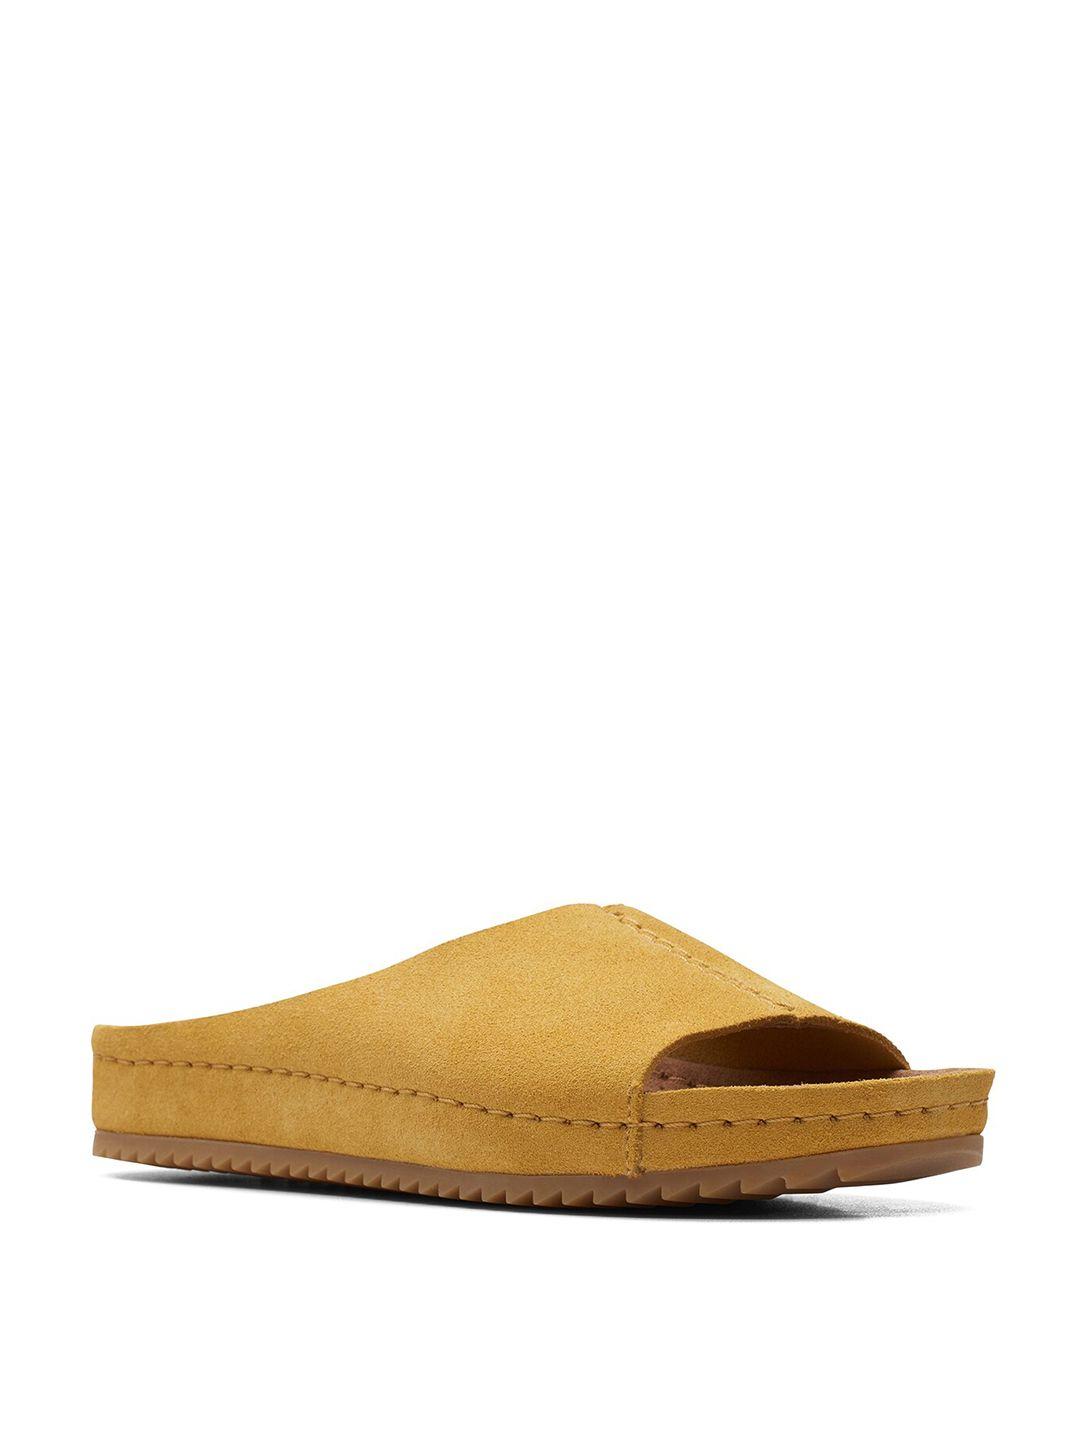 clarks women solid synthetic sliders